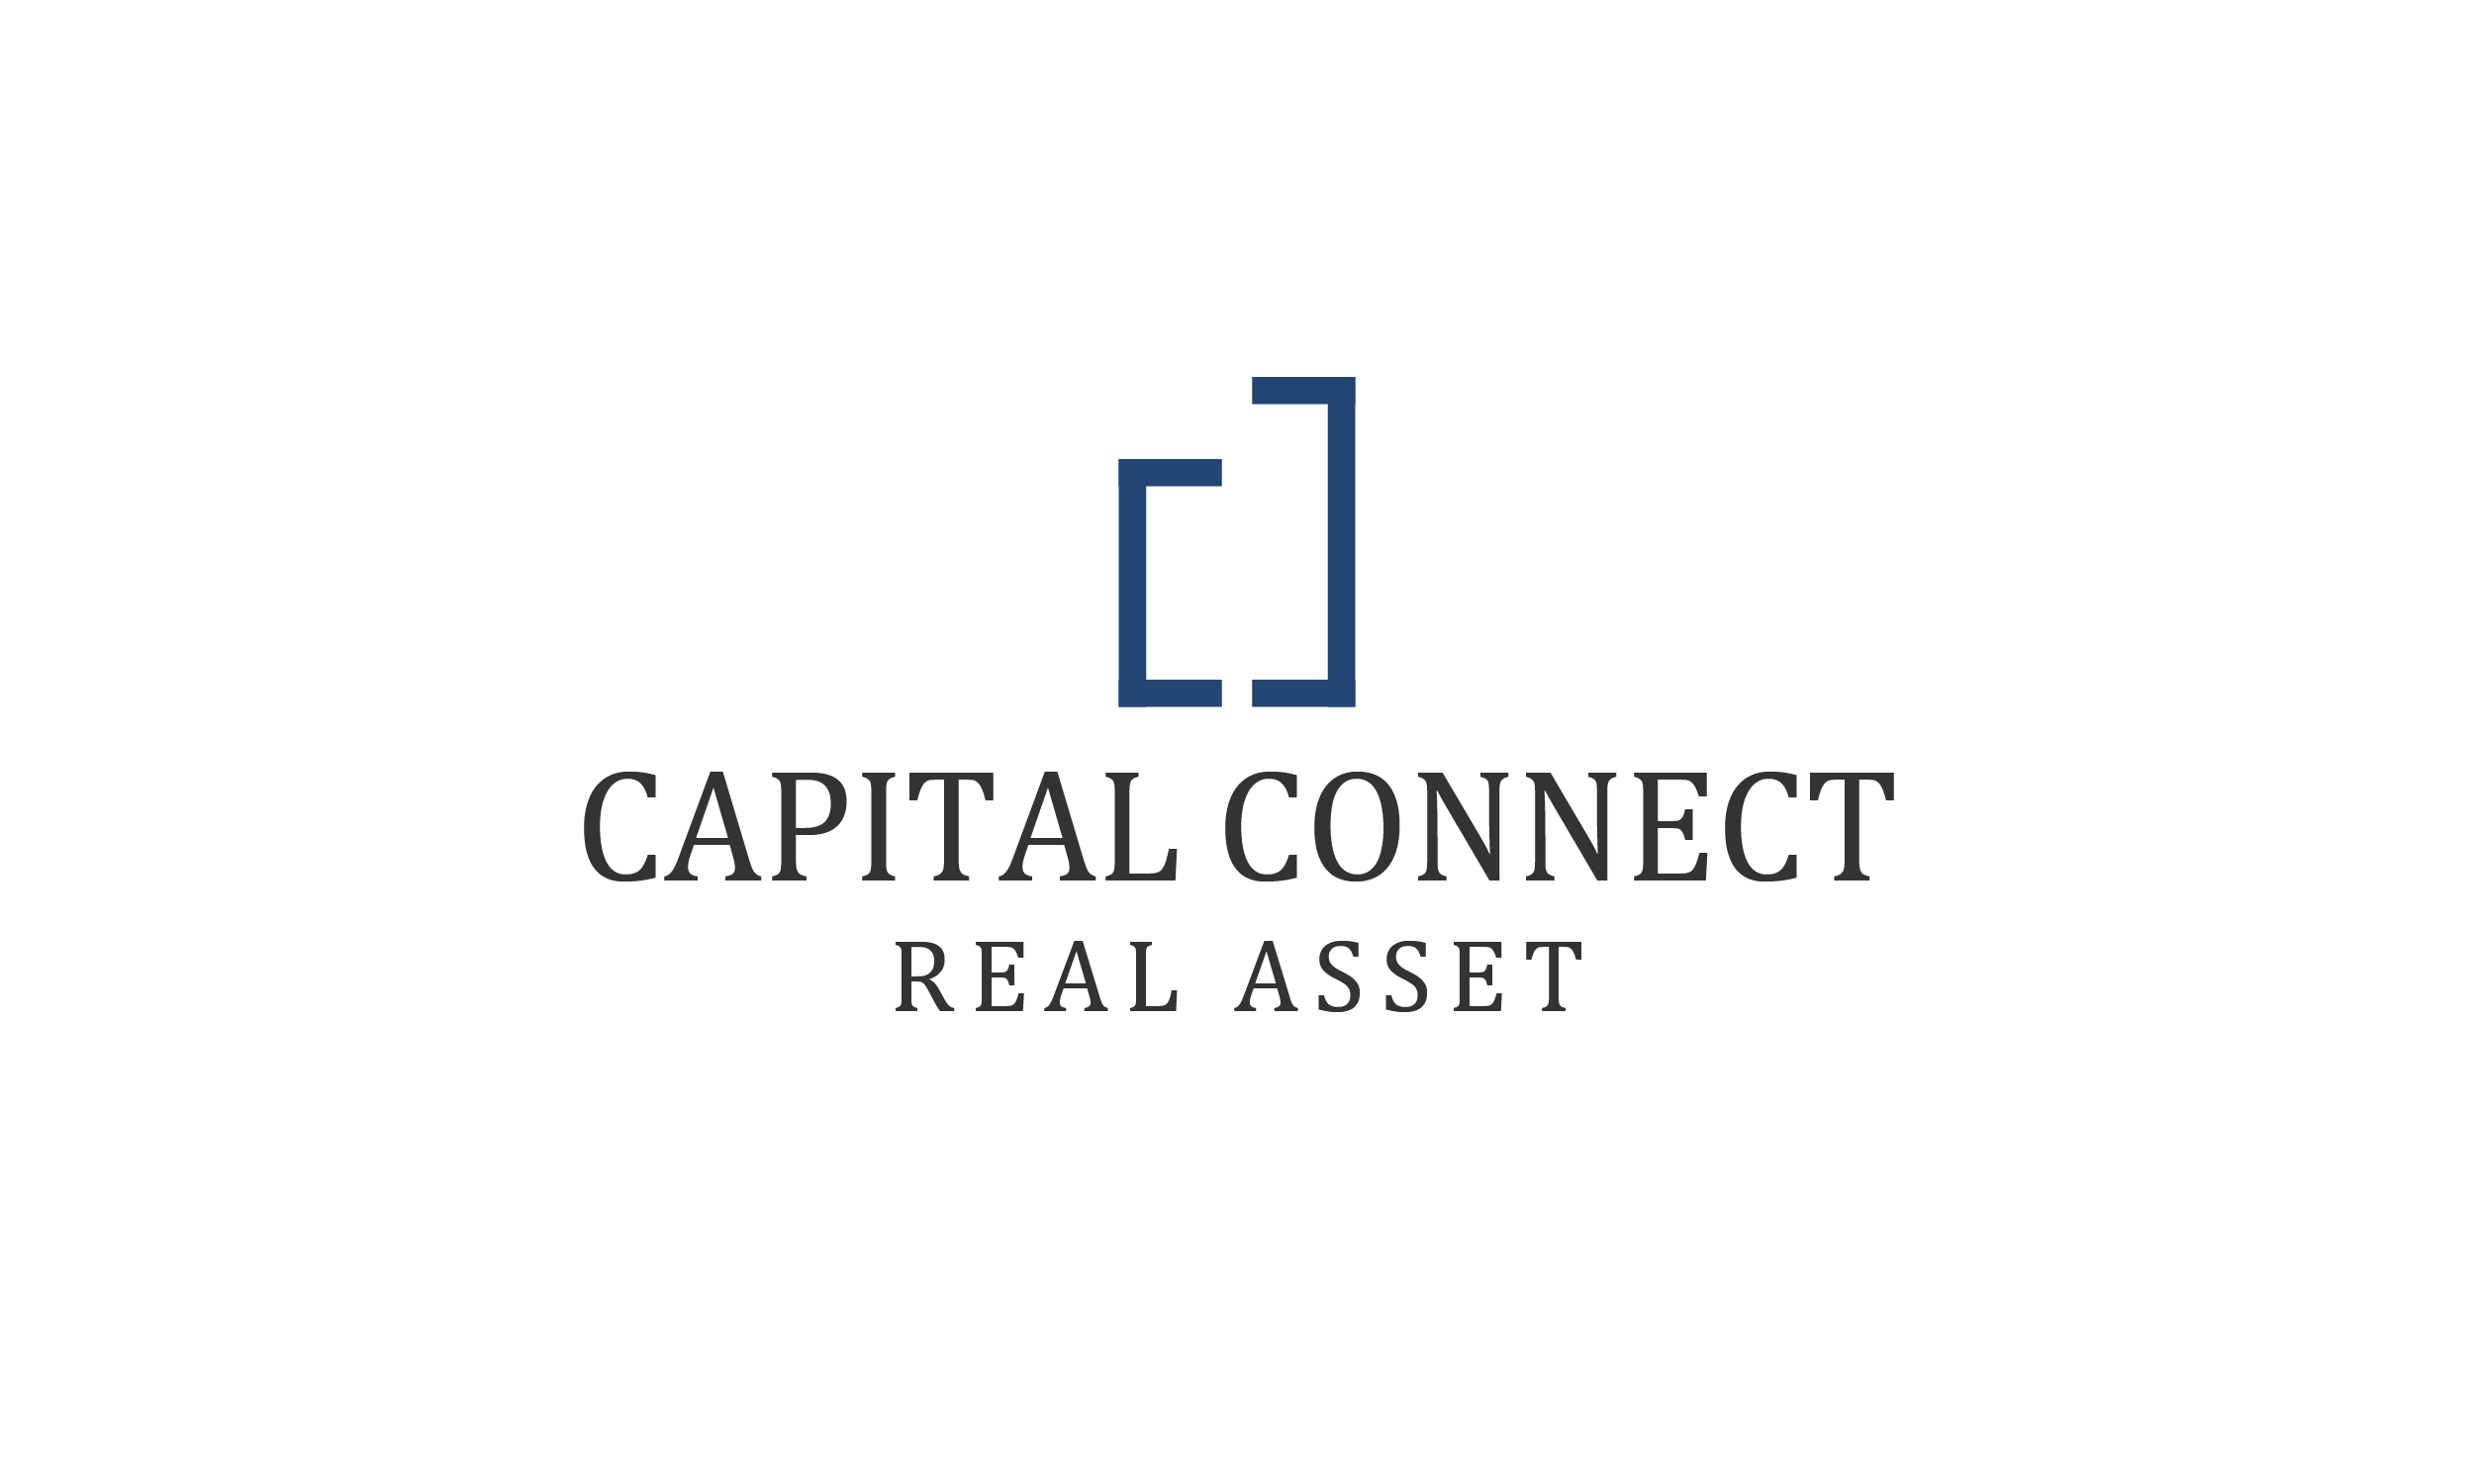 CAPITAL CONNECT